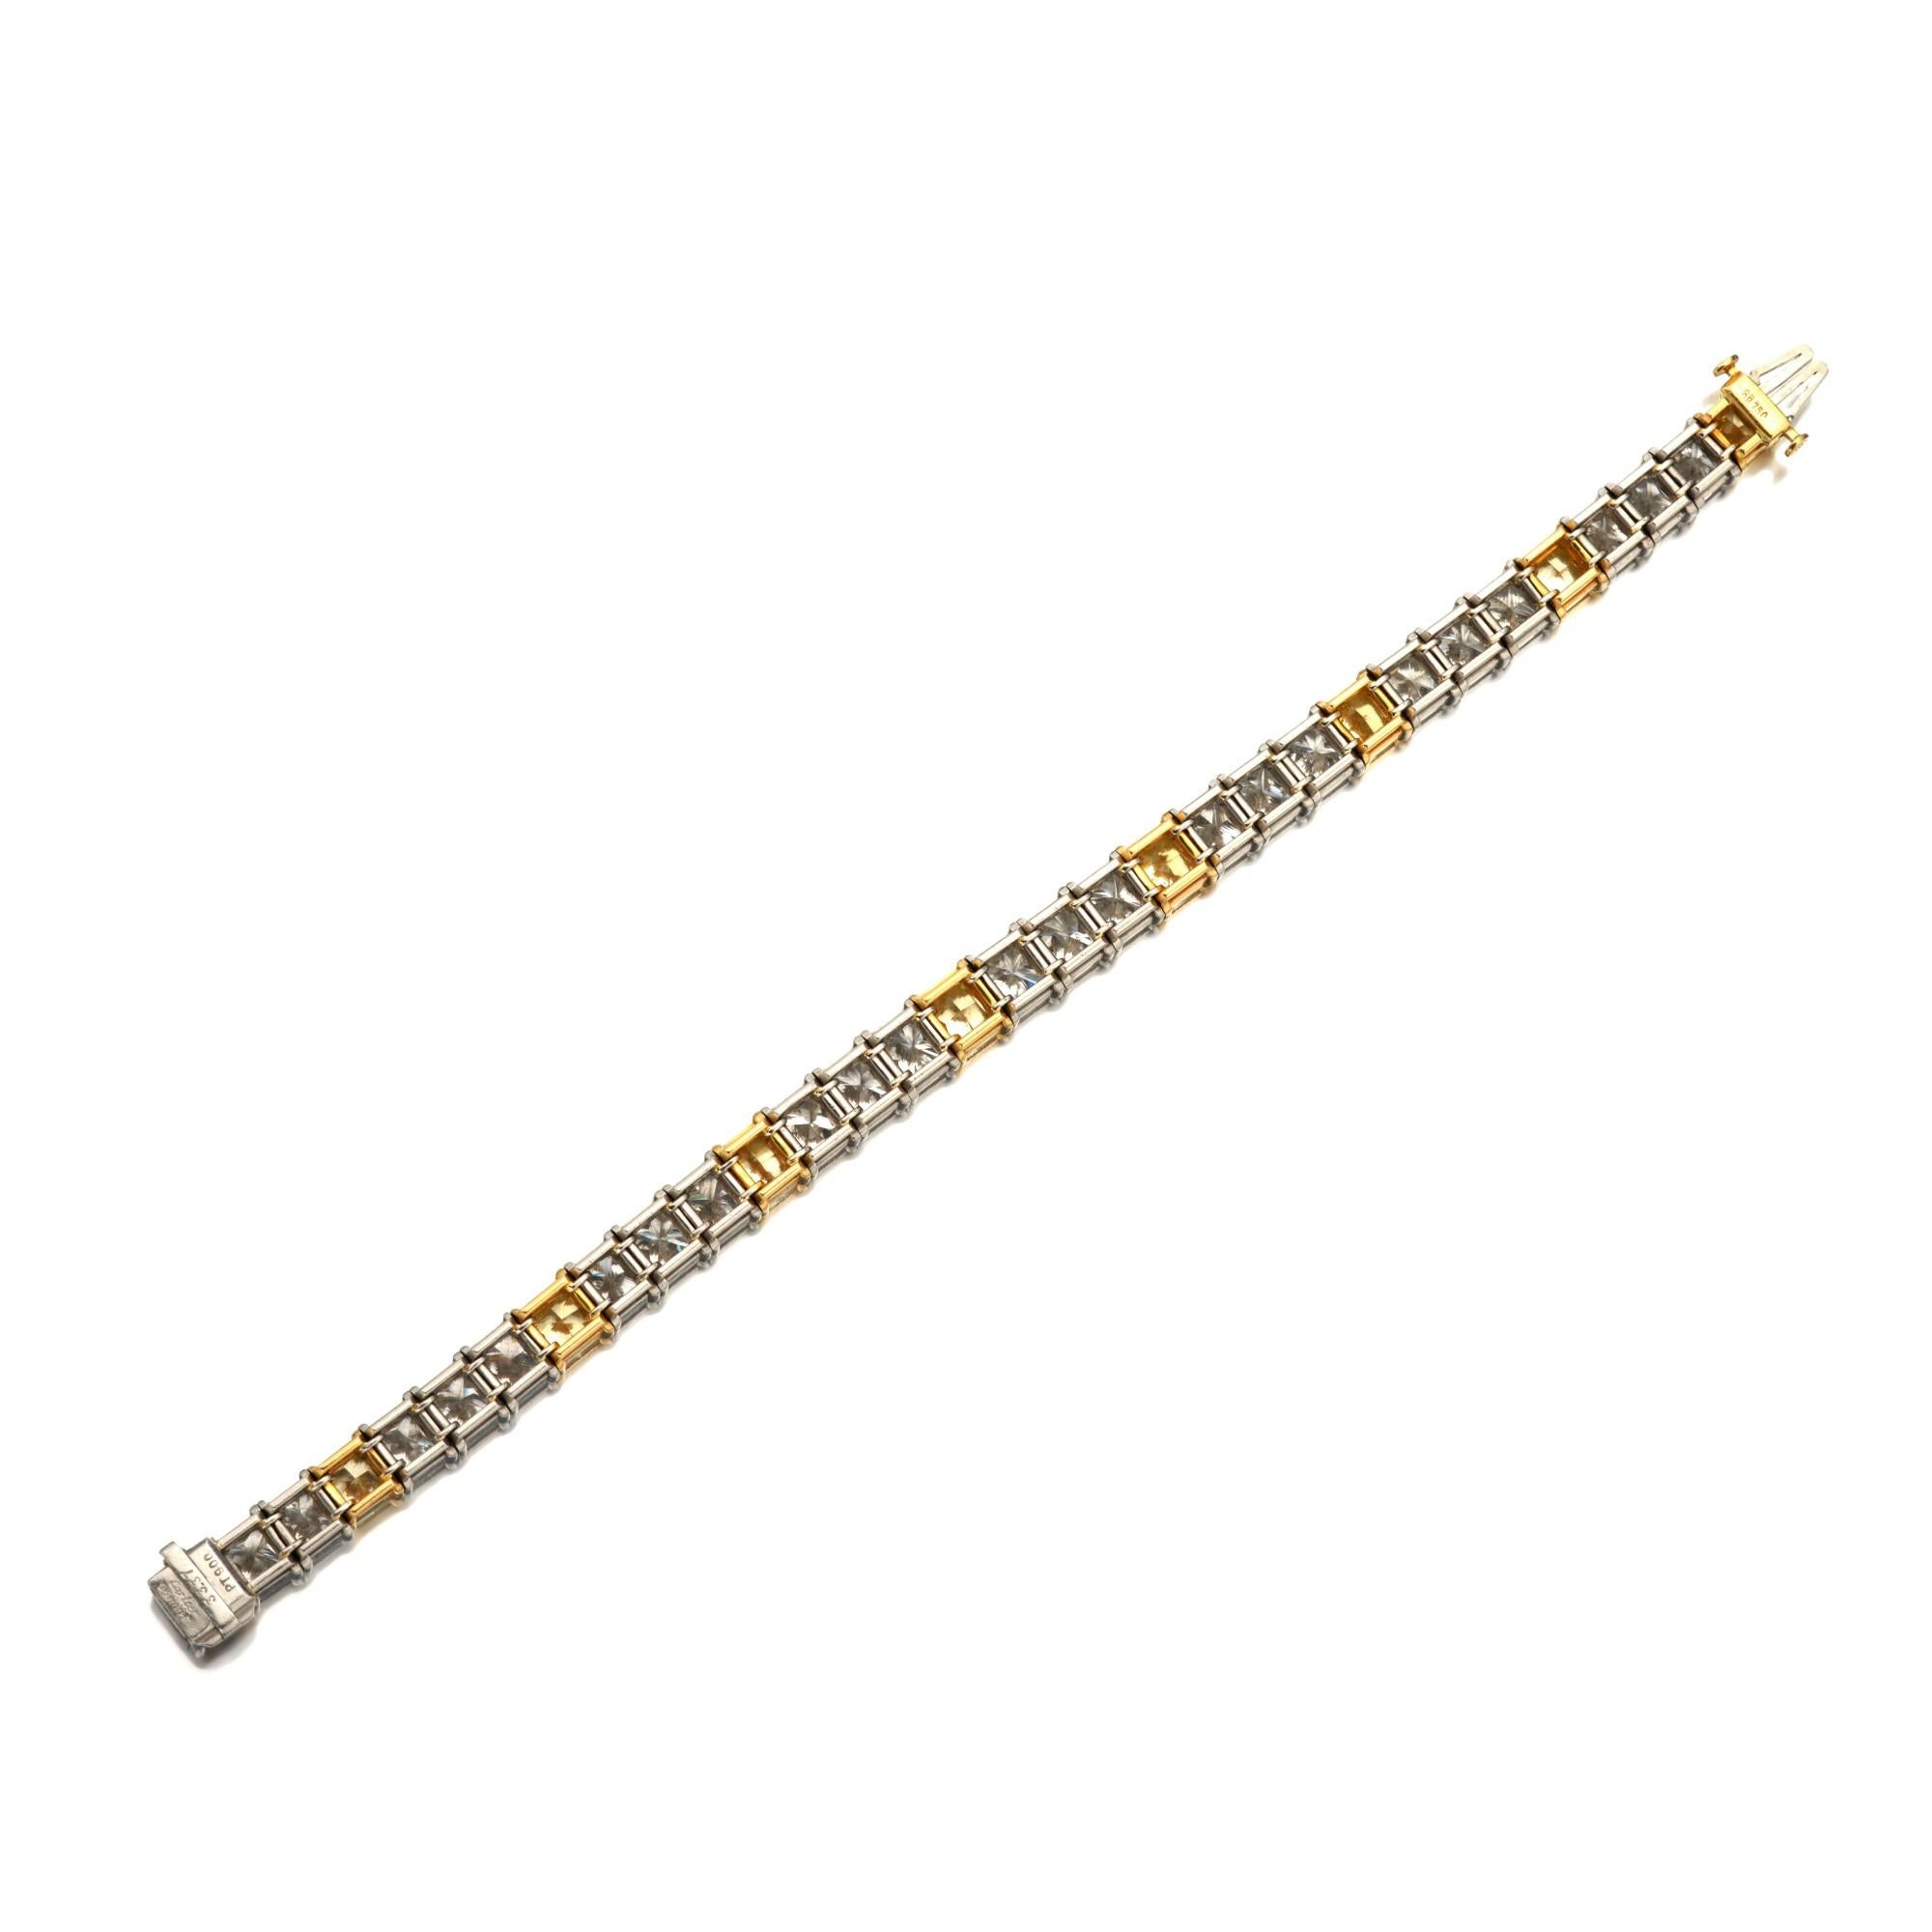 Cartier Colored Diamond   Bracelet. This line bracelet is designed as a line of
cut cornered modified brilliant-cut white diamonds weighing a total of approximately
24.70 carats  and yellow diamonds weighing a total of approximately 8.67